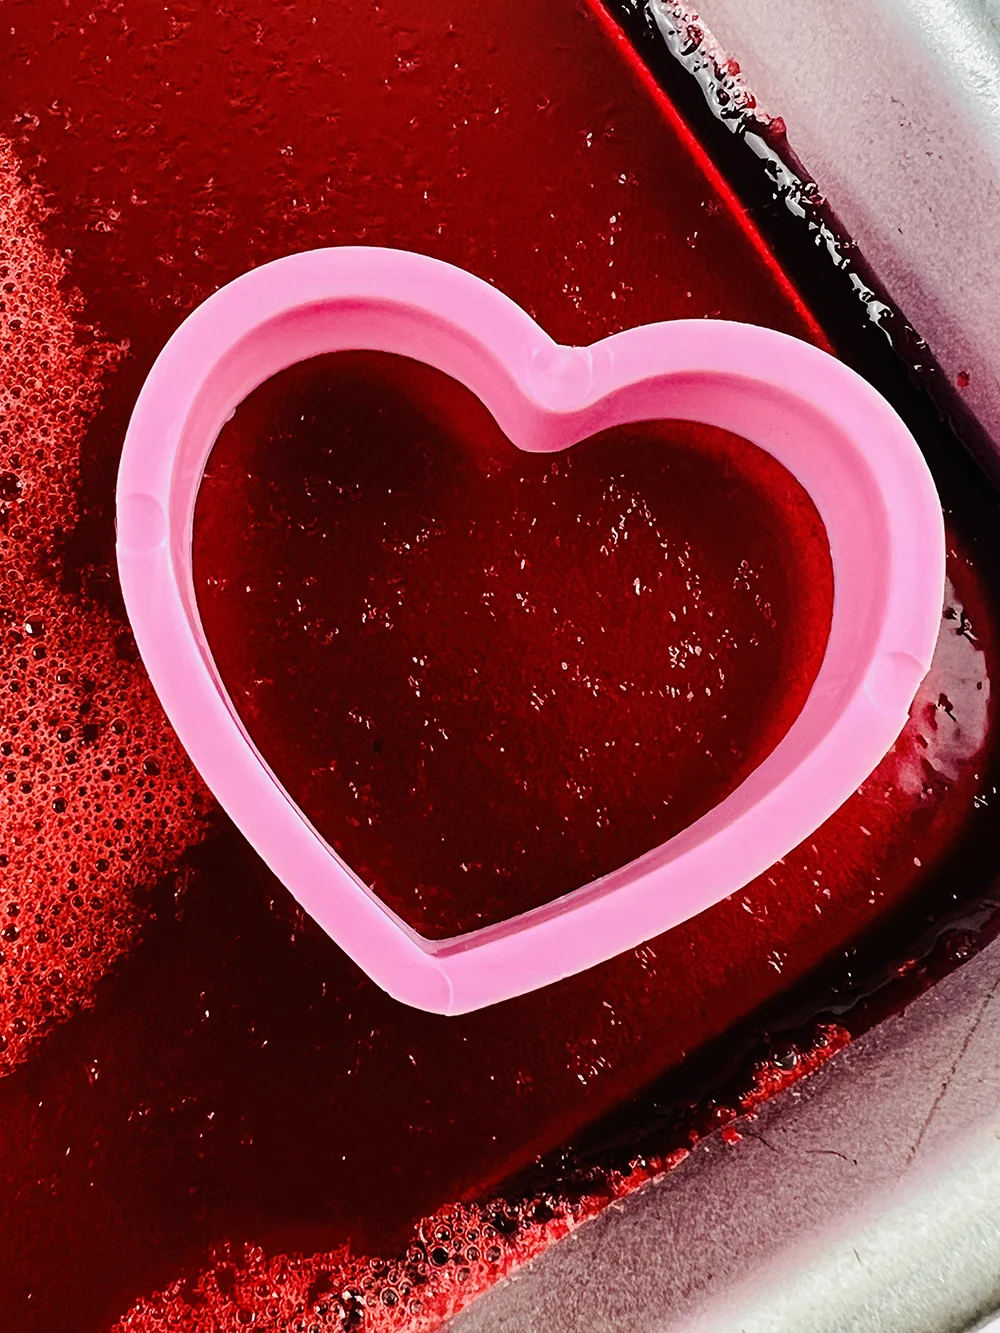 heart cookie cutter on a sheet of red jello